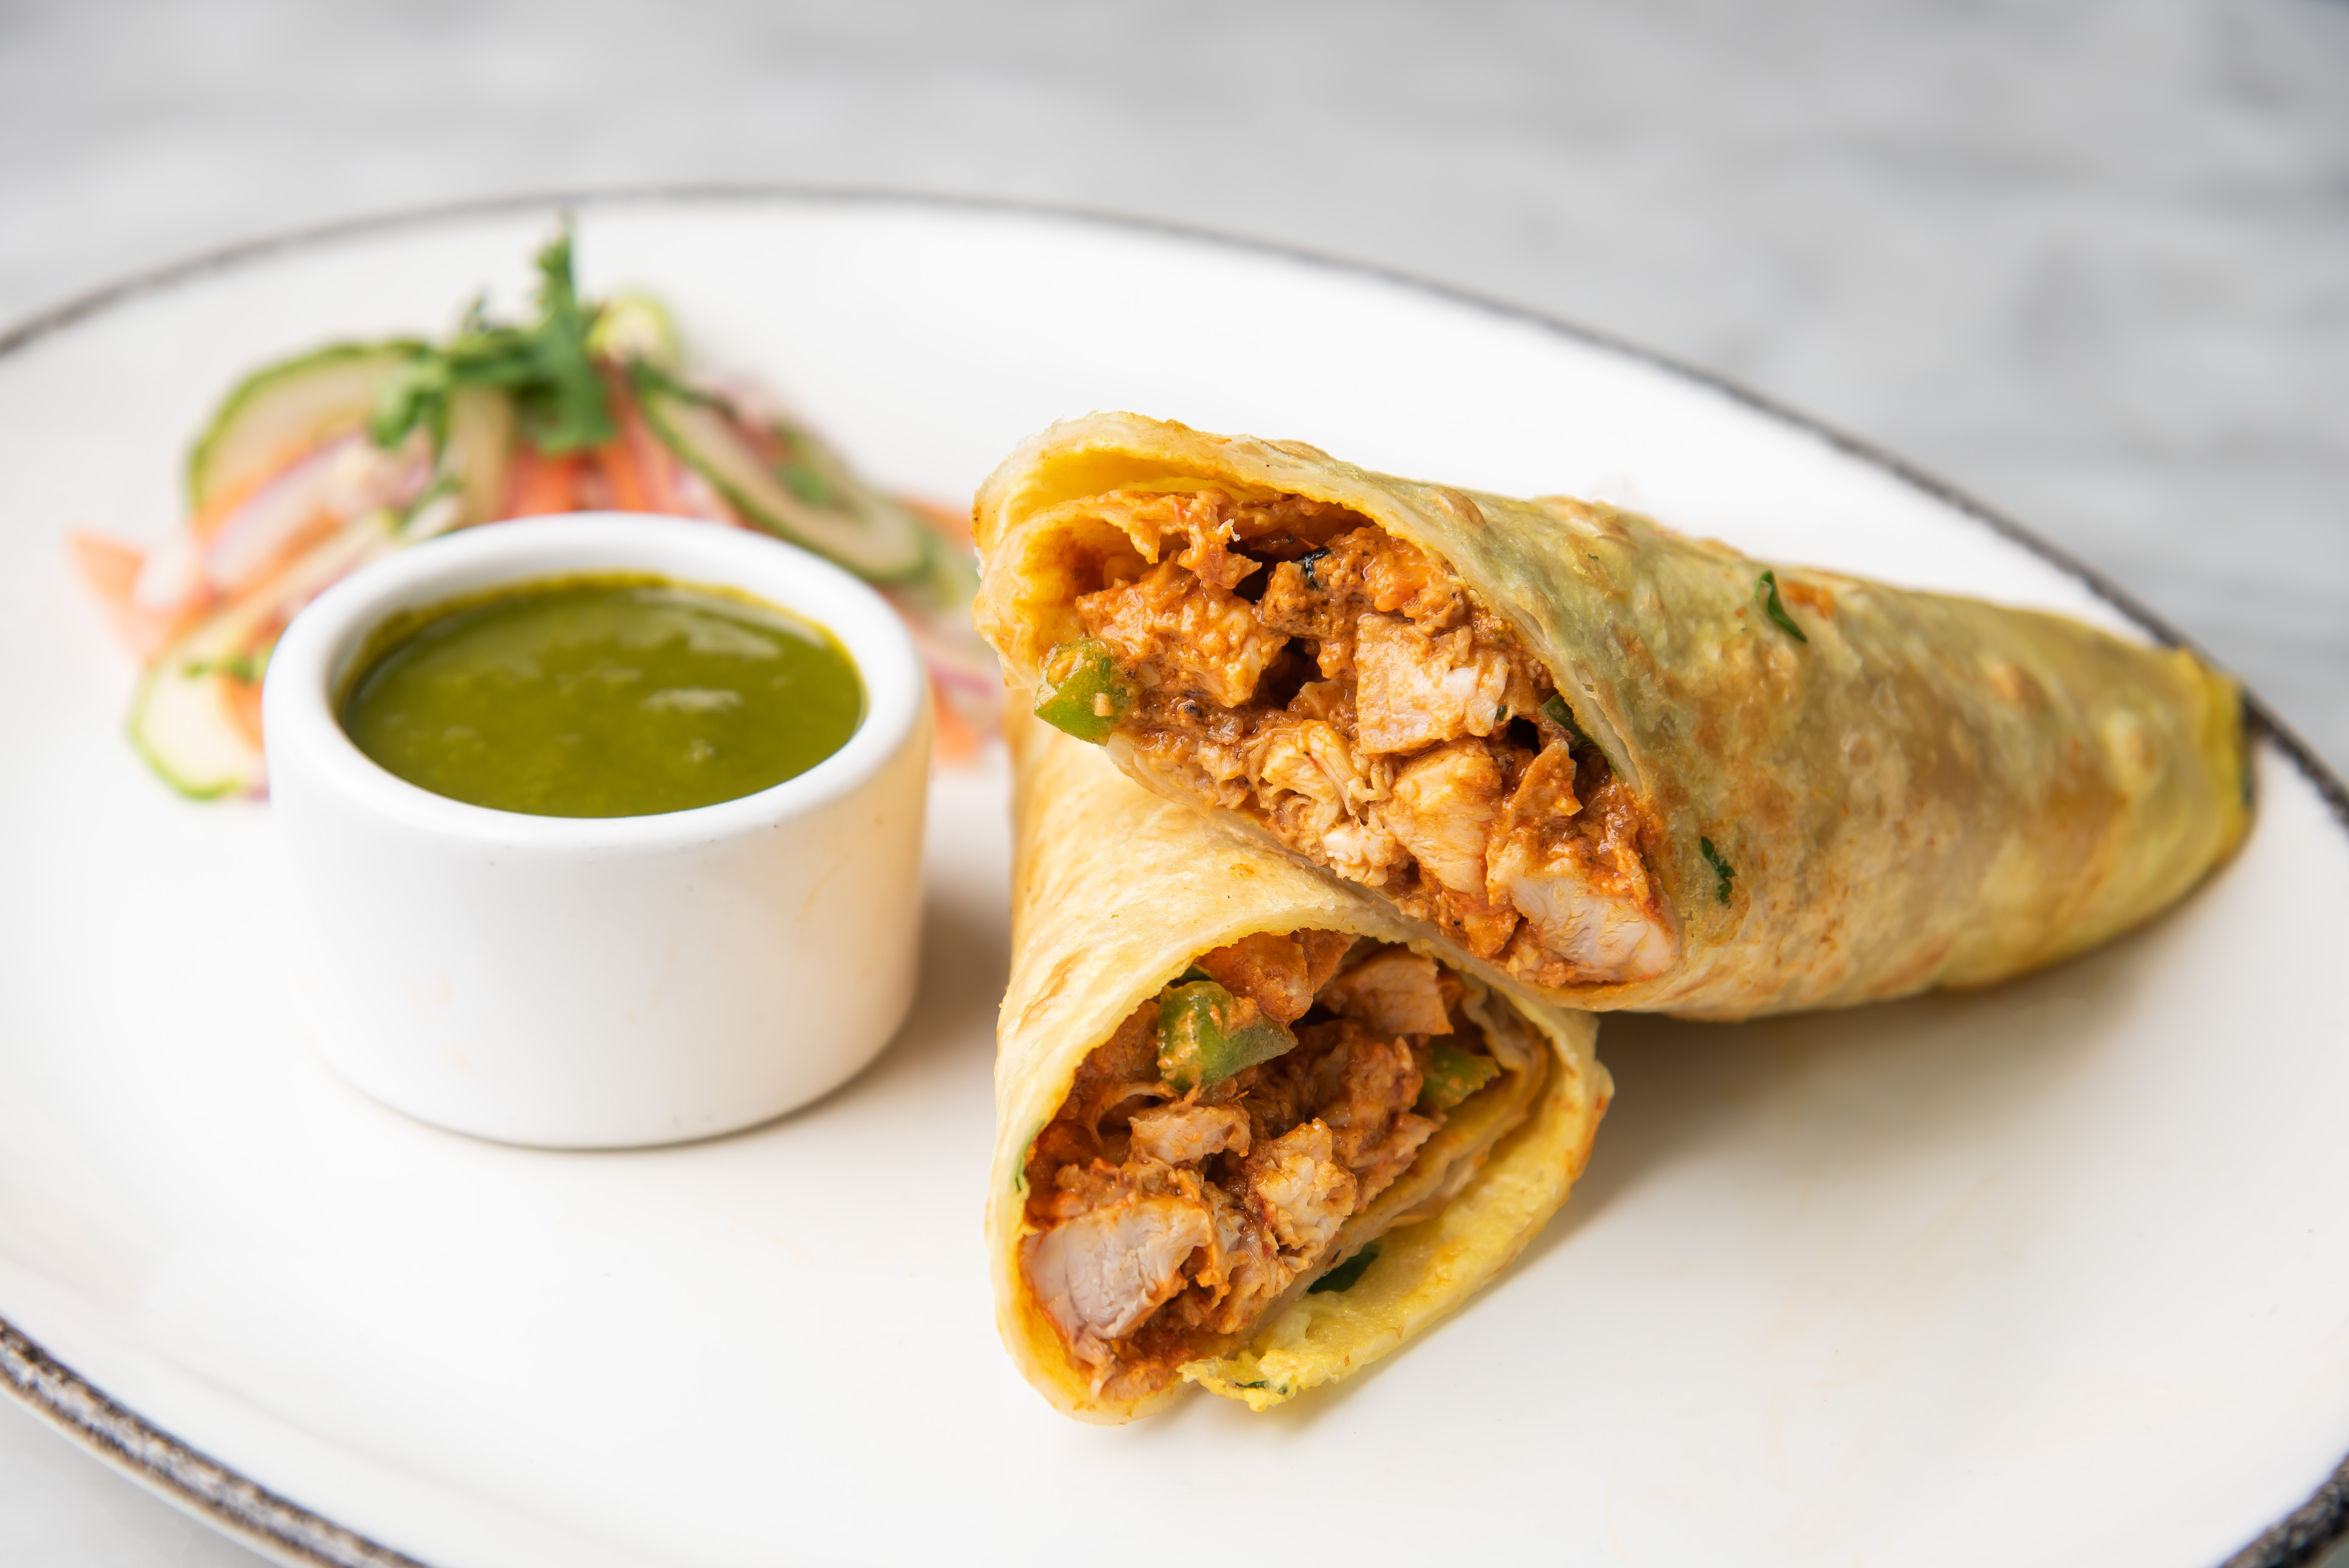 A chicken kathi roll with mint cilantro chutney will be at the new Bindaas location